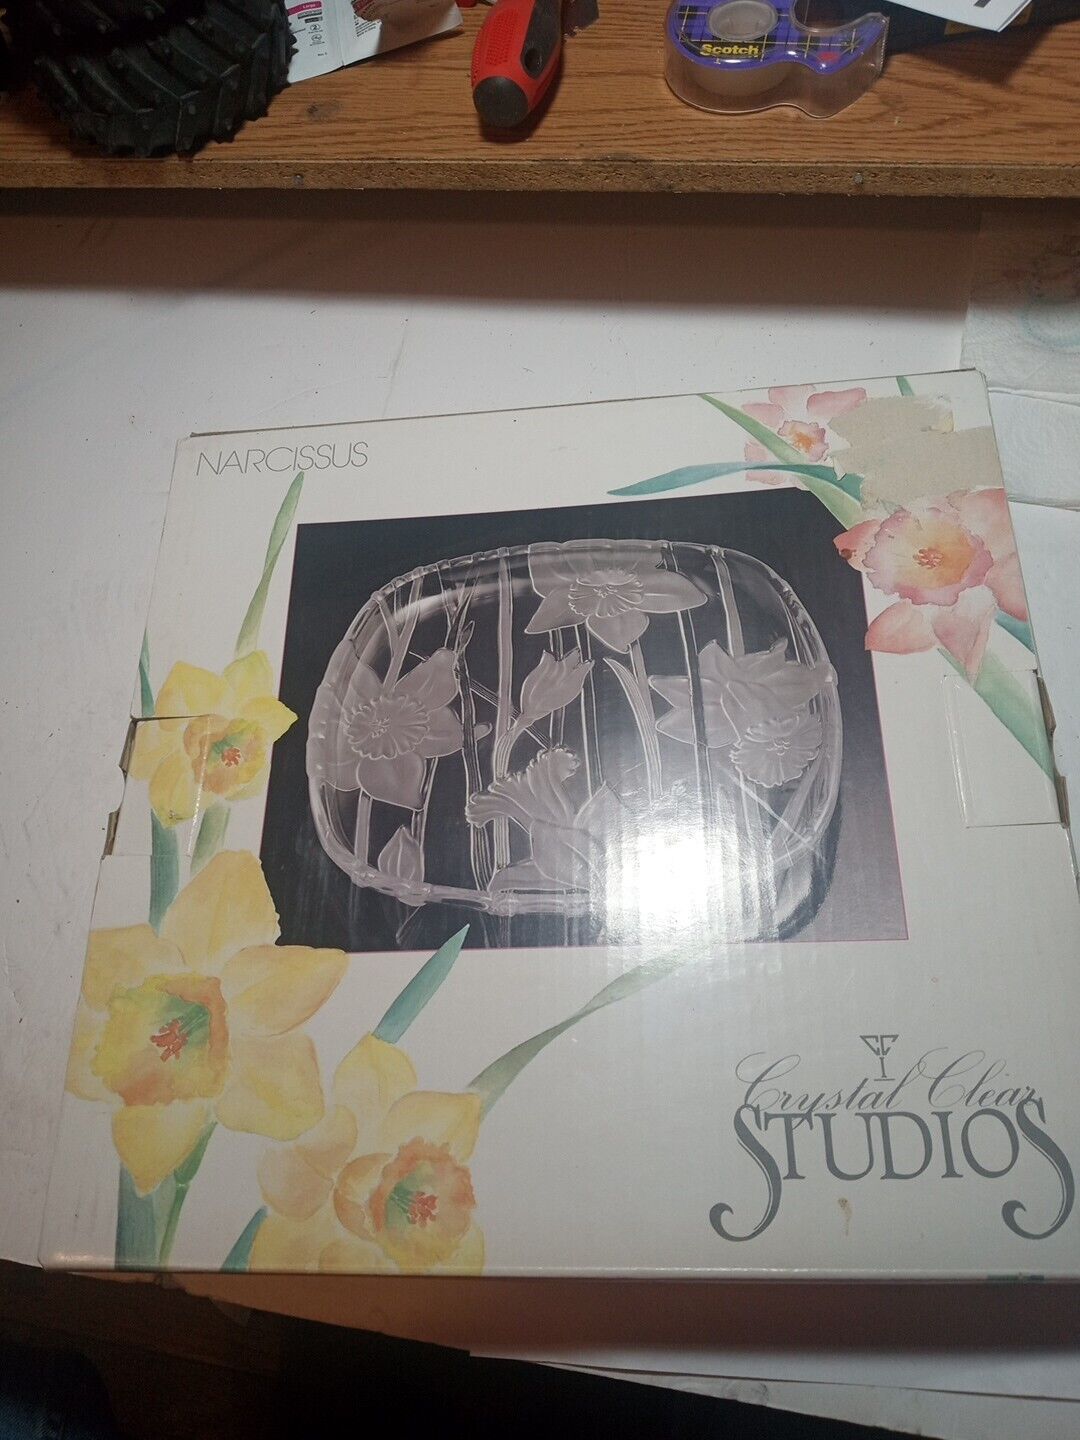 NEW OPEN BOX Vintage 1989 Crystal Clear Studios Narcissus Serving Platter